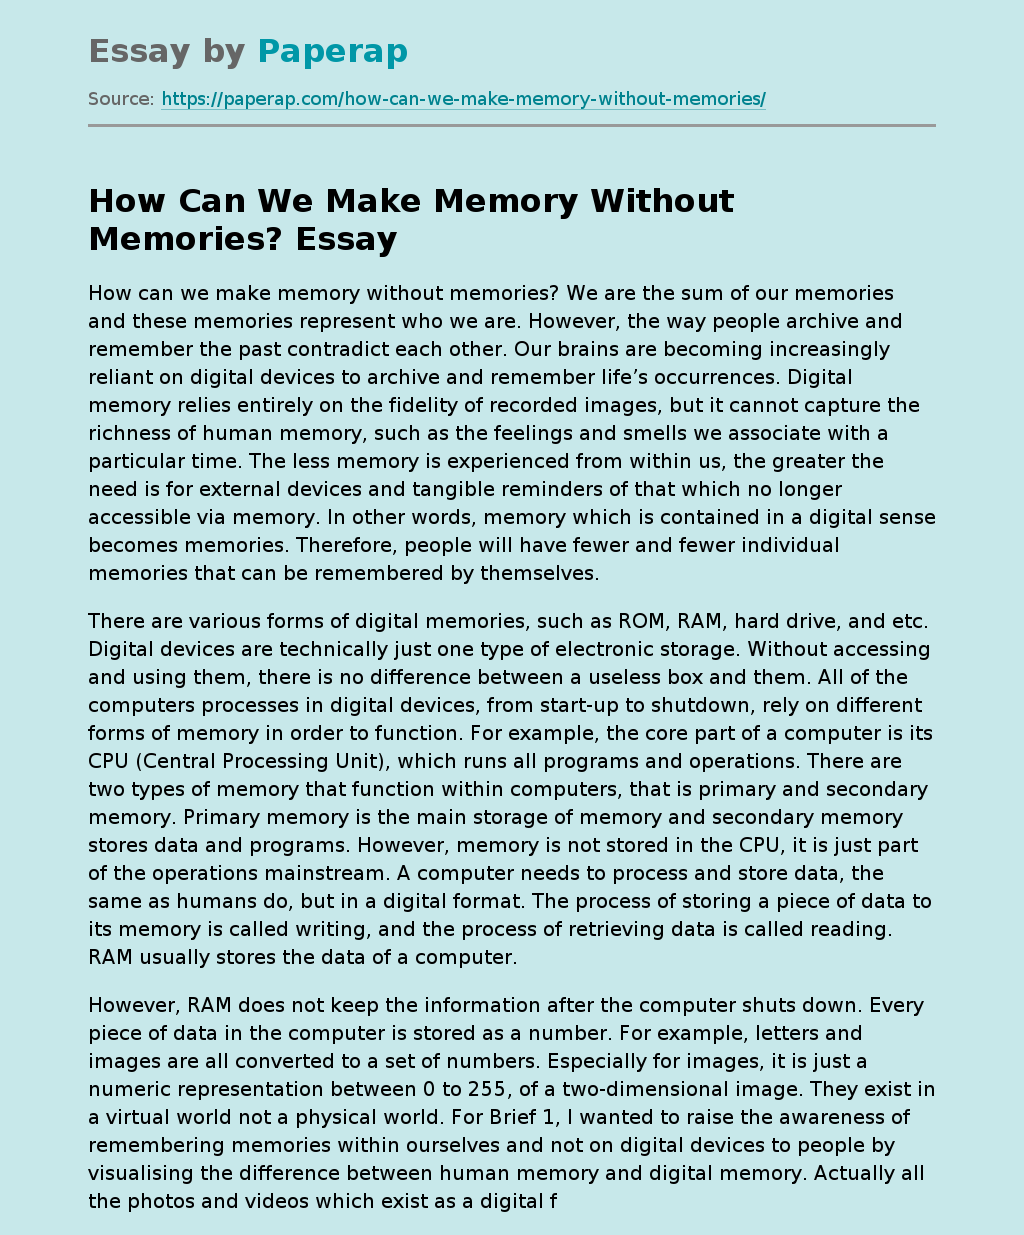 How Can We Make Memory Without Memories?